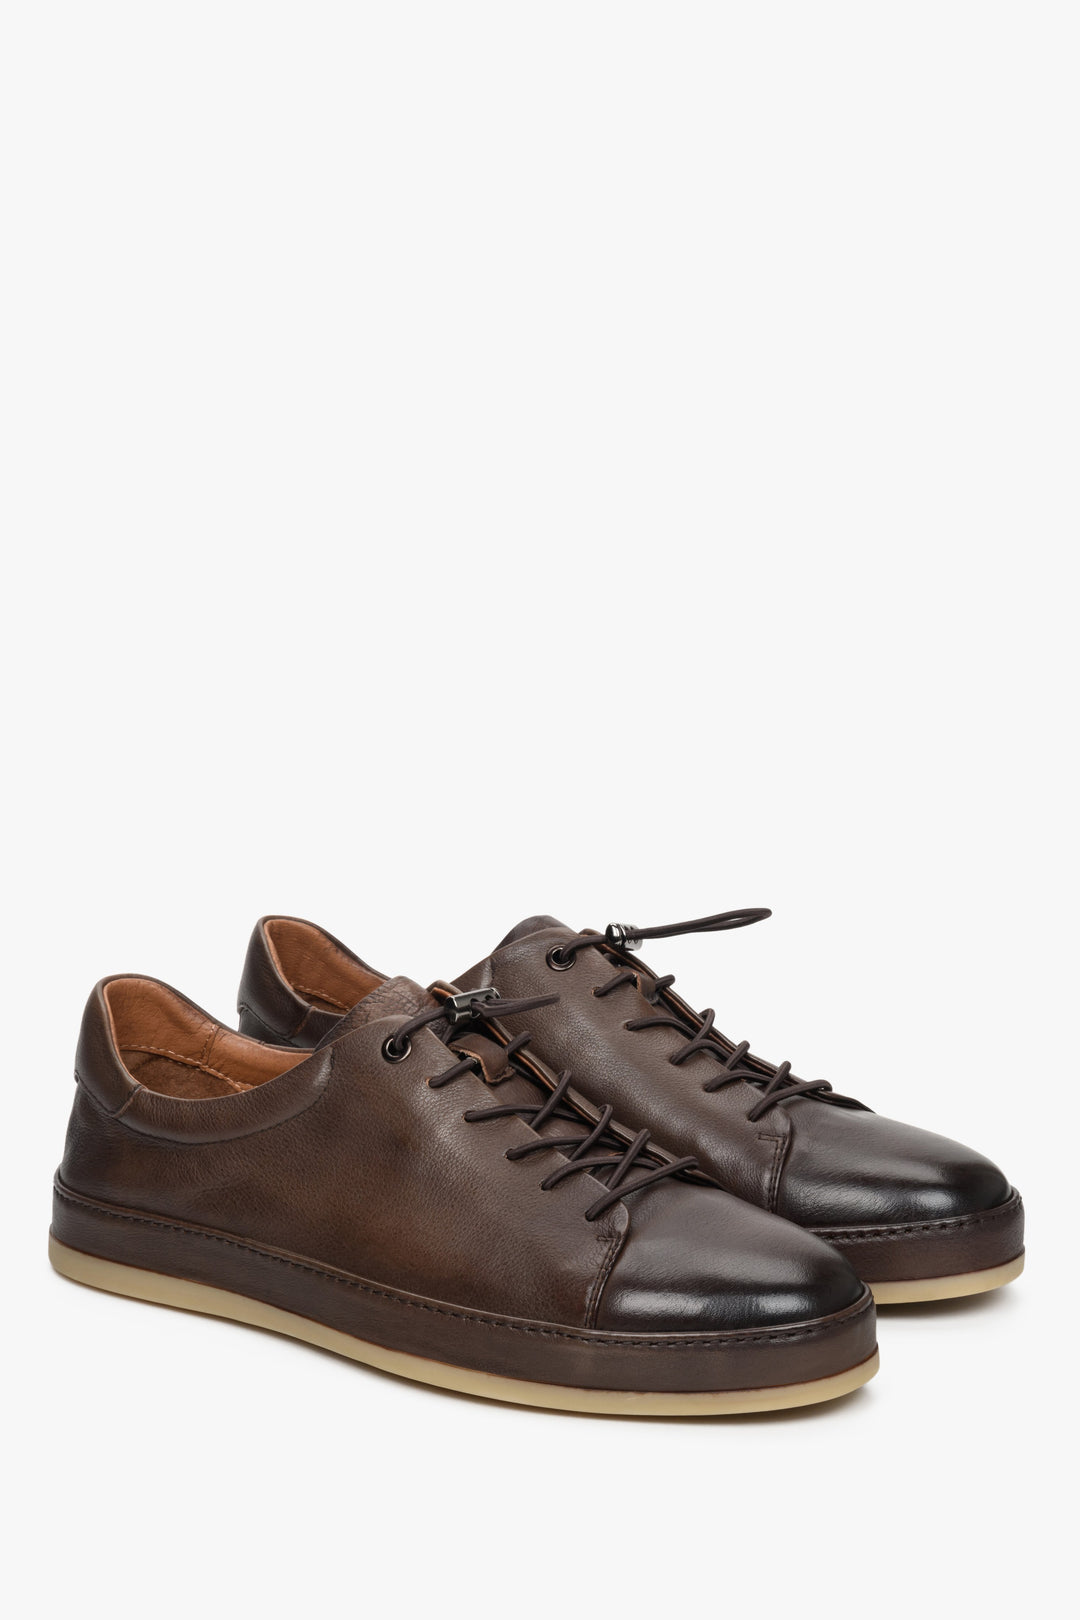 Men's brown sneakers made of genuine leather by Estro - presentation of the toe and side seam of the shoes.